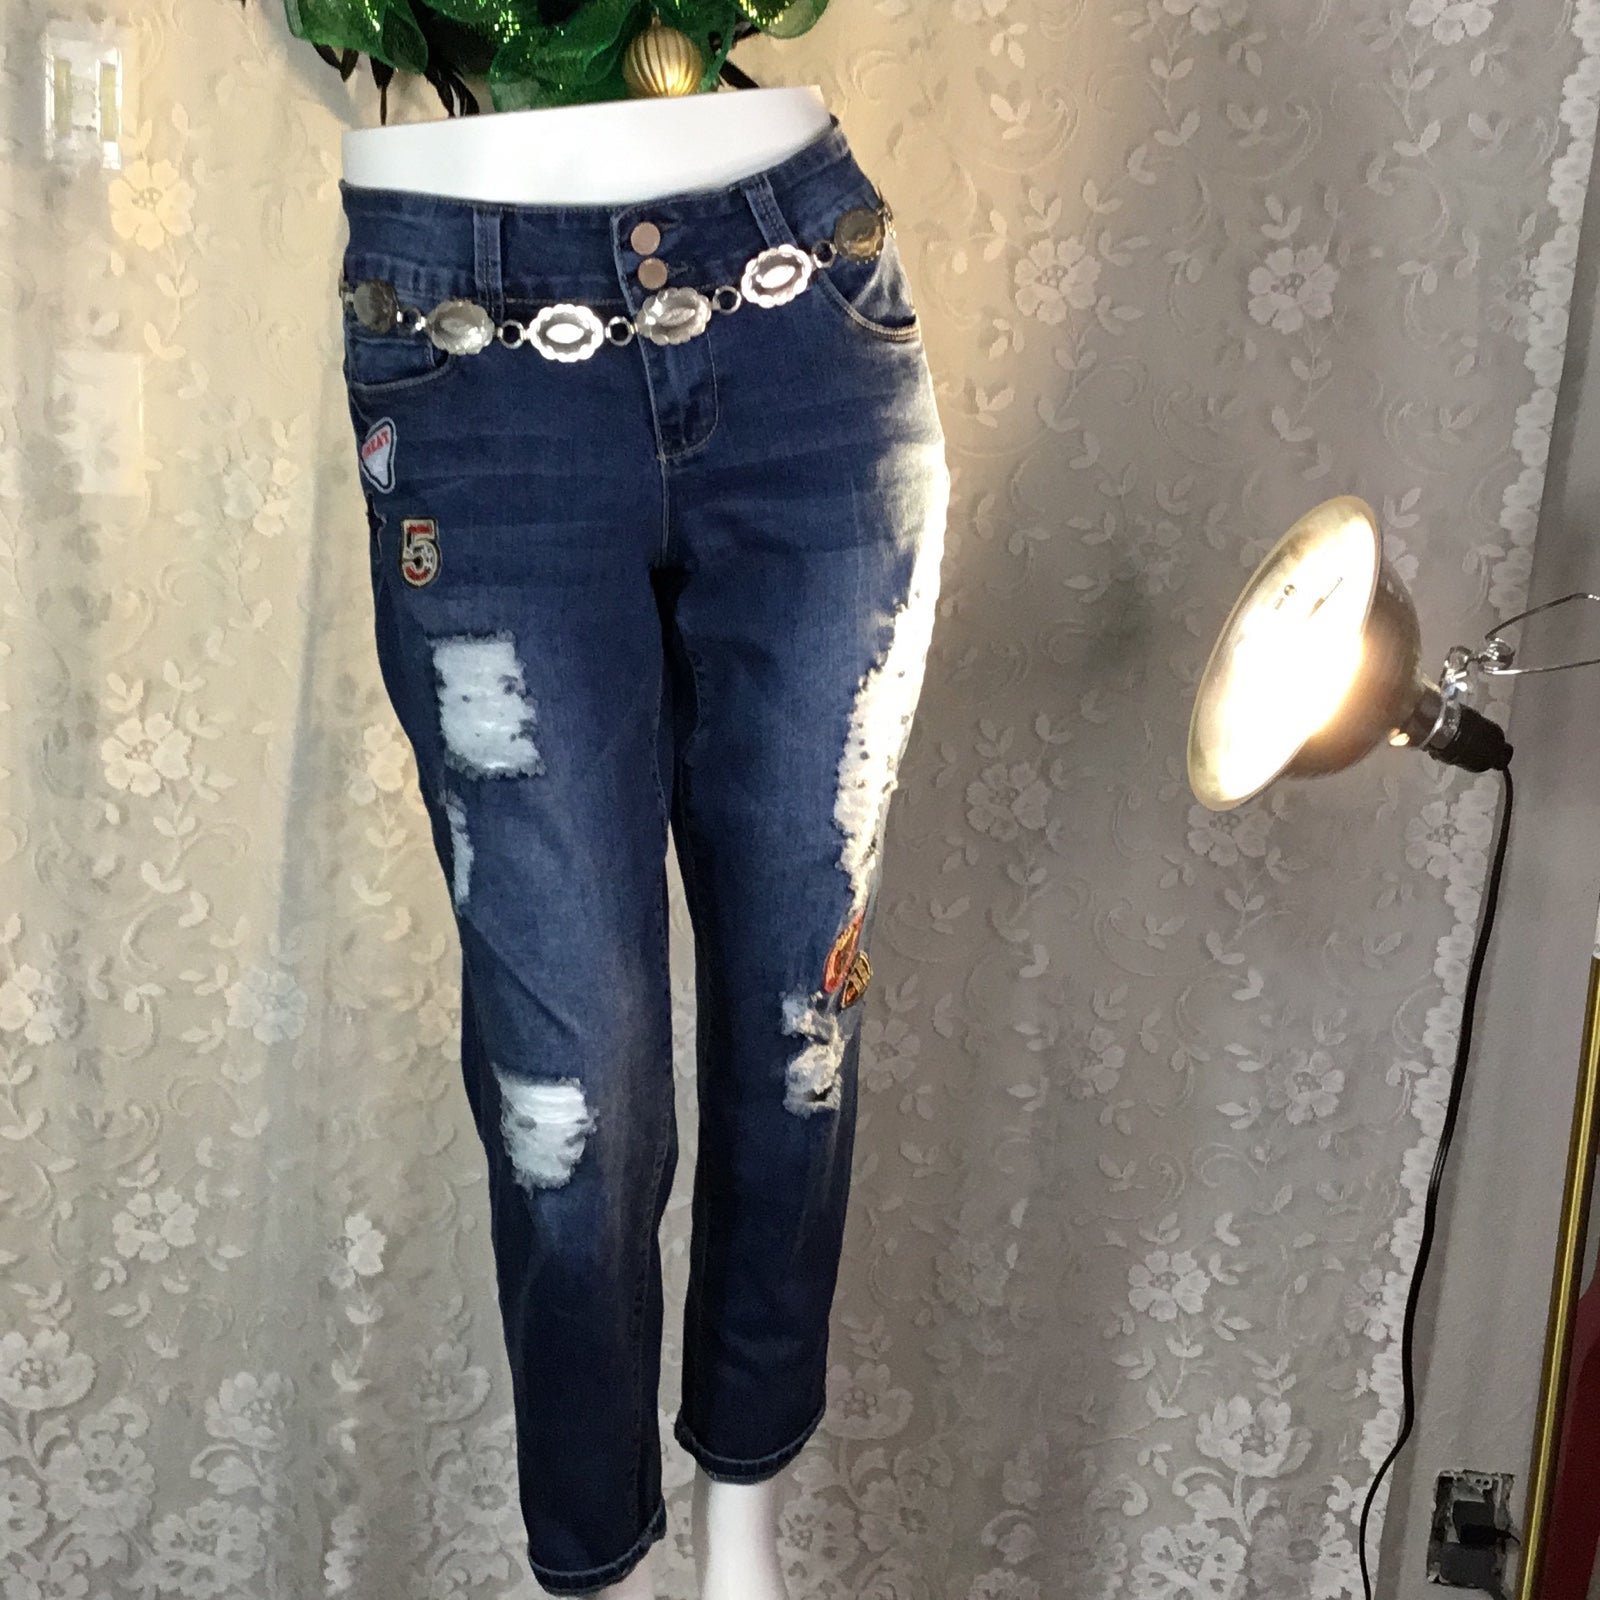 large selection YMI           DISTRESSED  JEANS  WITH ASSORTED PATCHES jVVlpEXvW Online Shop